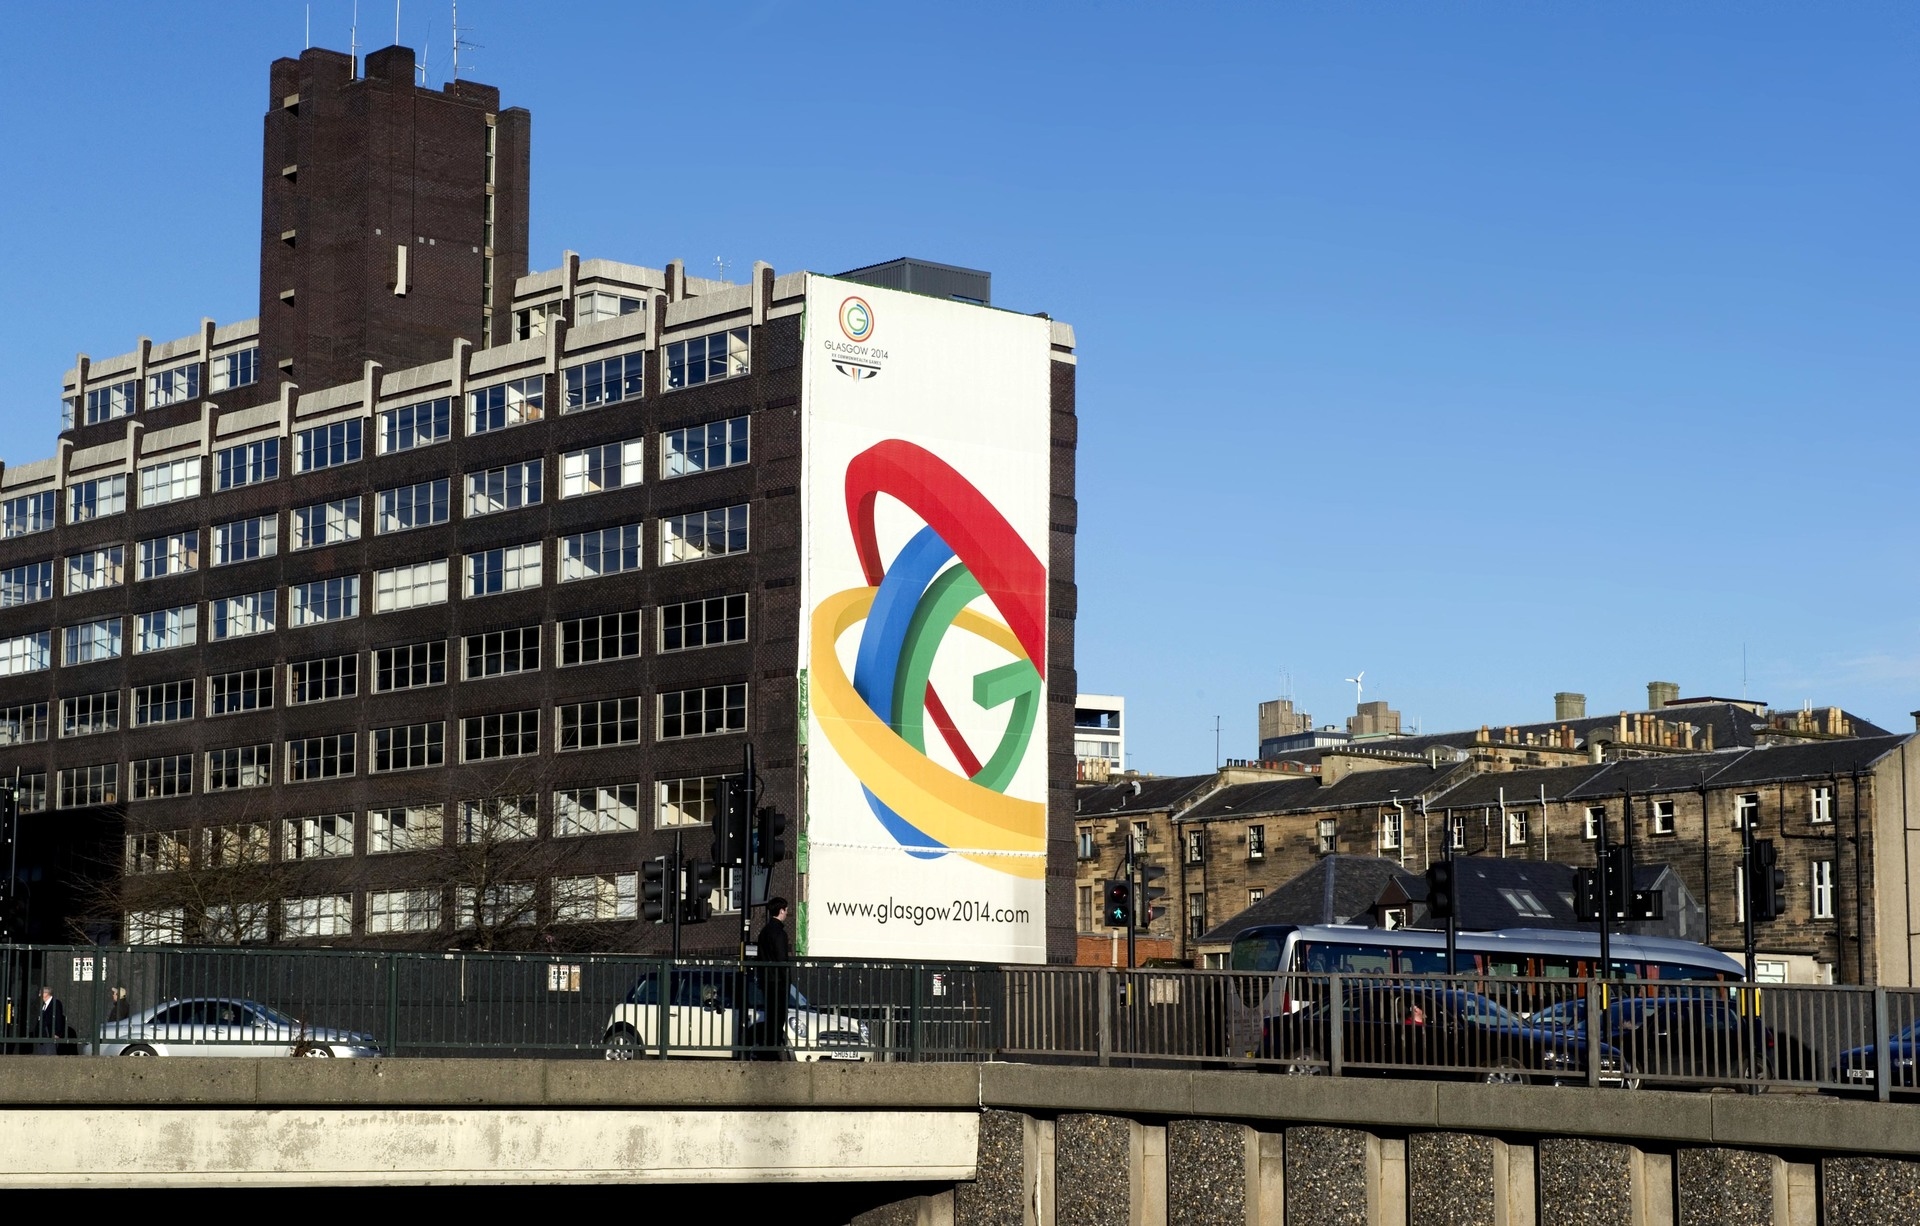 The 2026 games in Glasgow would be a slimmed down version of the 2014 events.